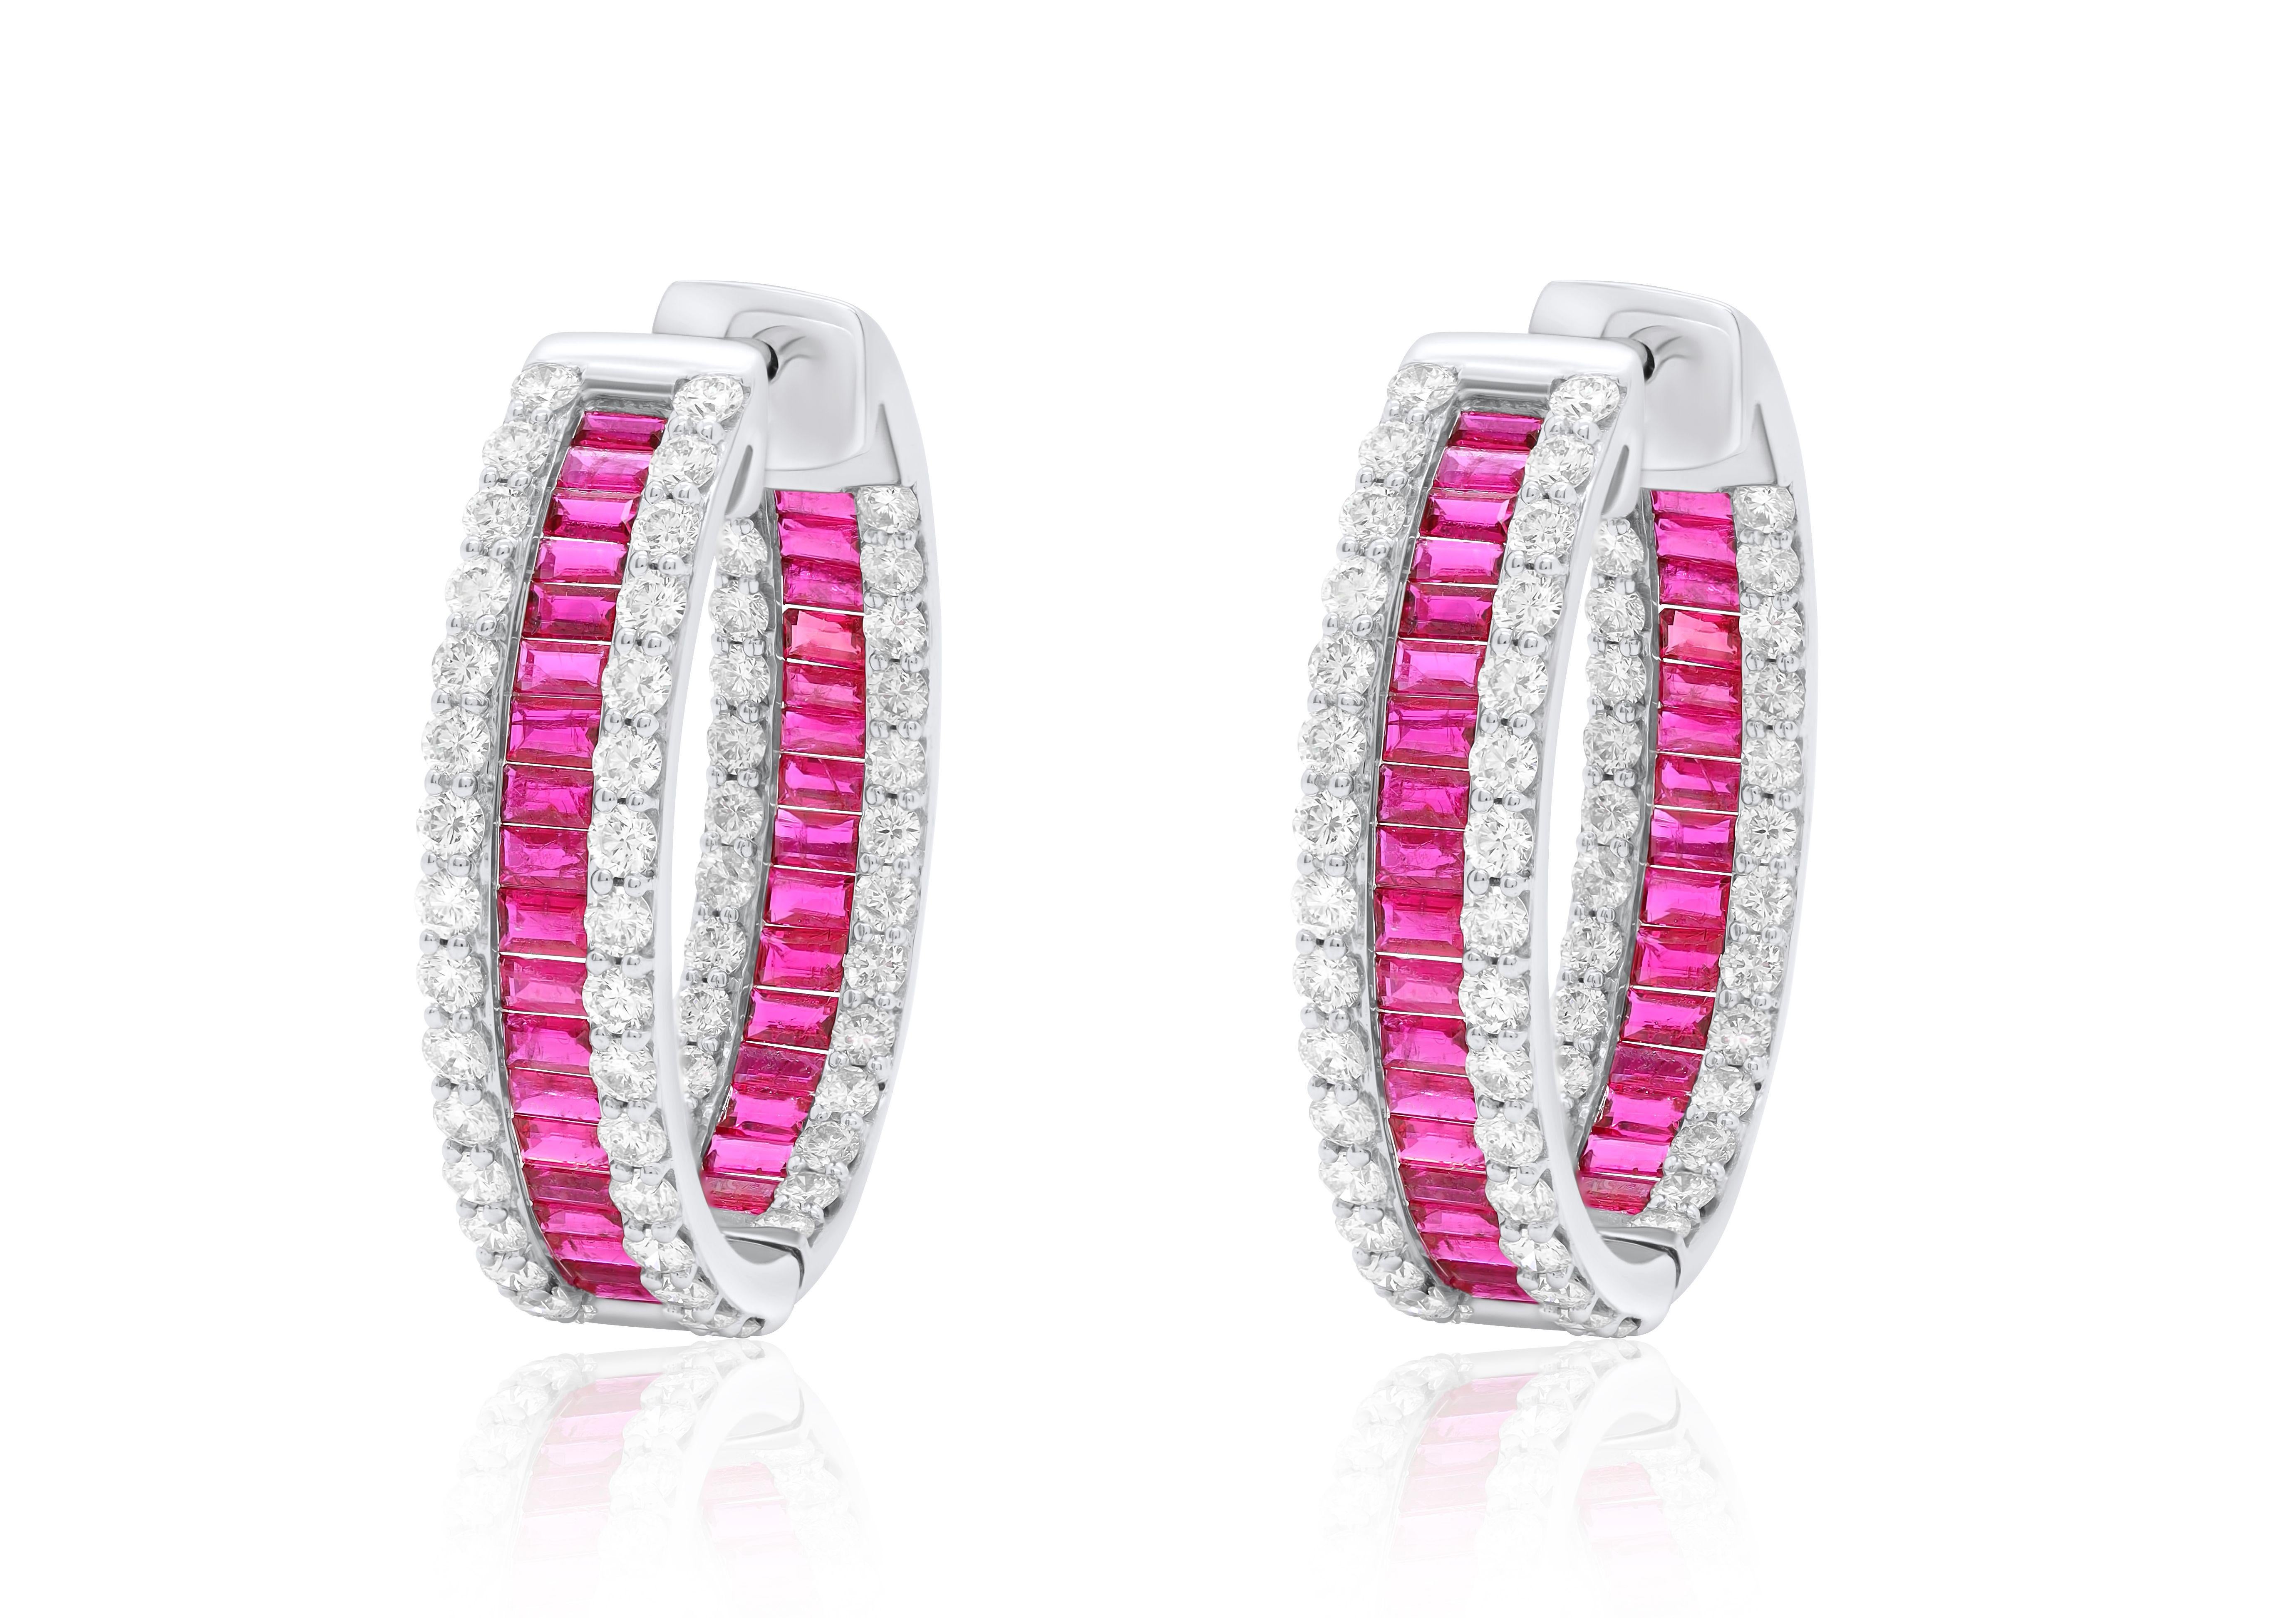 14kt white gold fashion earring hoops rubies 4.25cts 37 stones with 3.63cts diamonds 116 stones